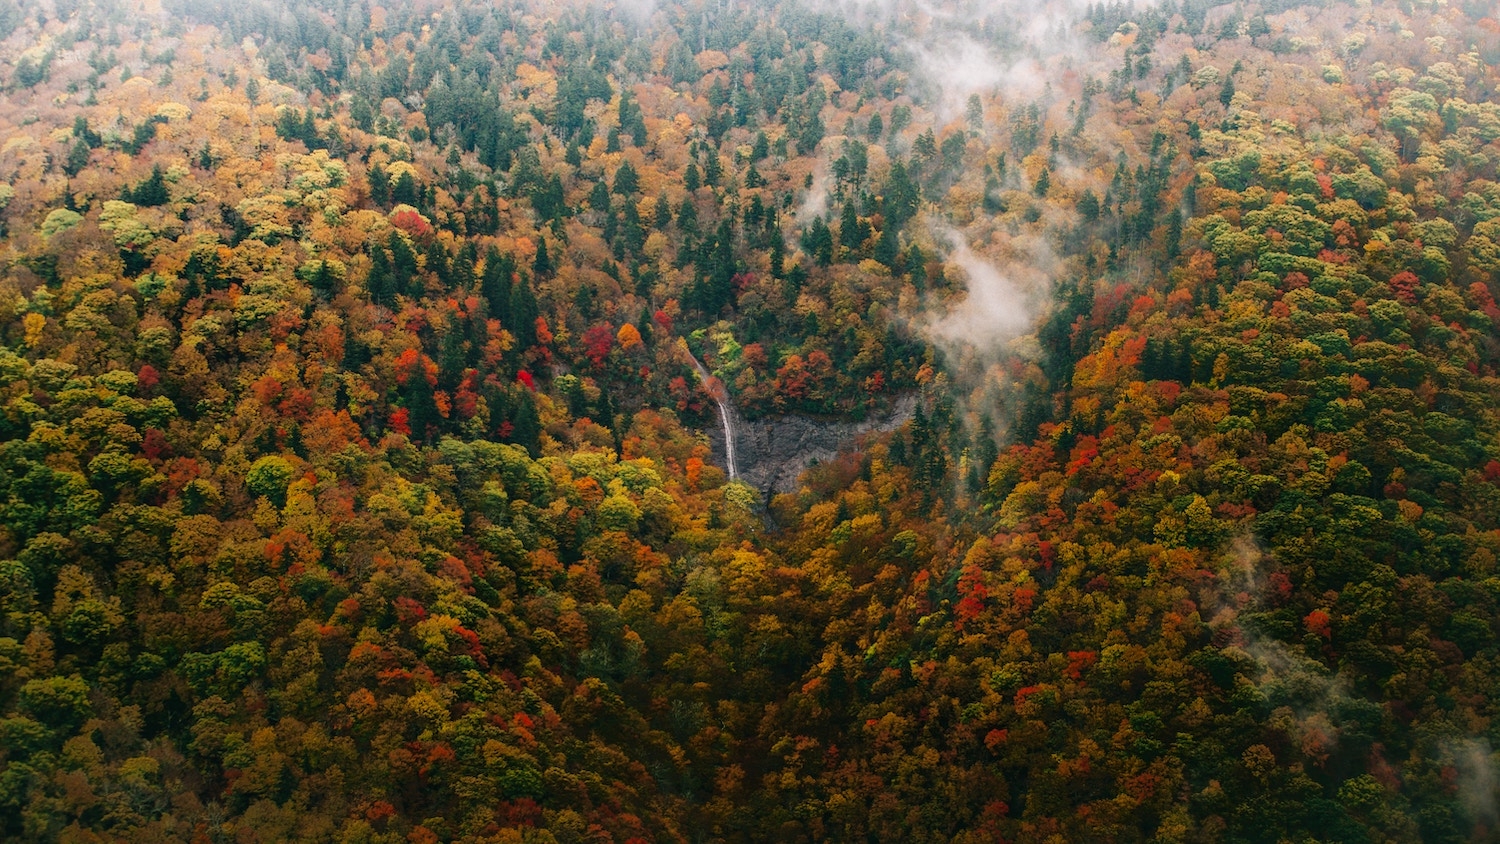 An aerial view of a forest in the fall - Fall Foliage in North Carolina: What to Expect This Year - Forestry and Environmental Resources at NC State University